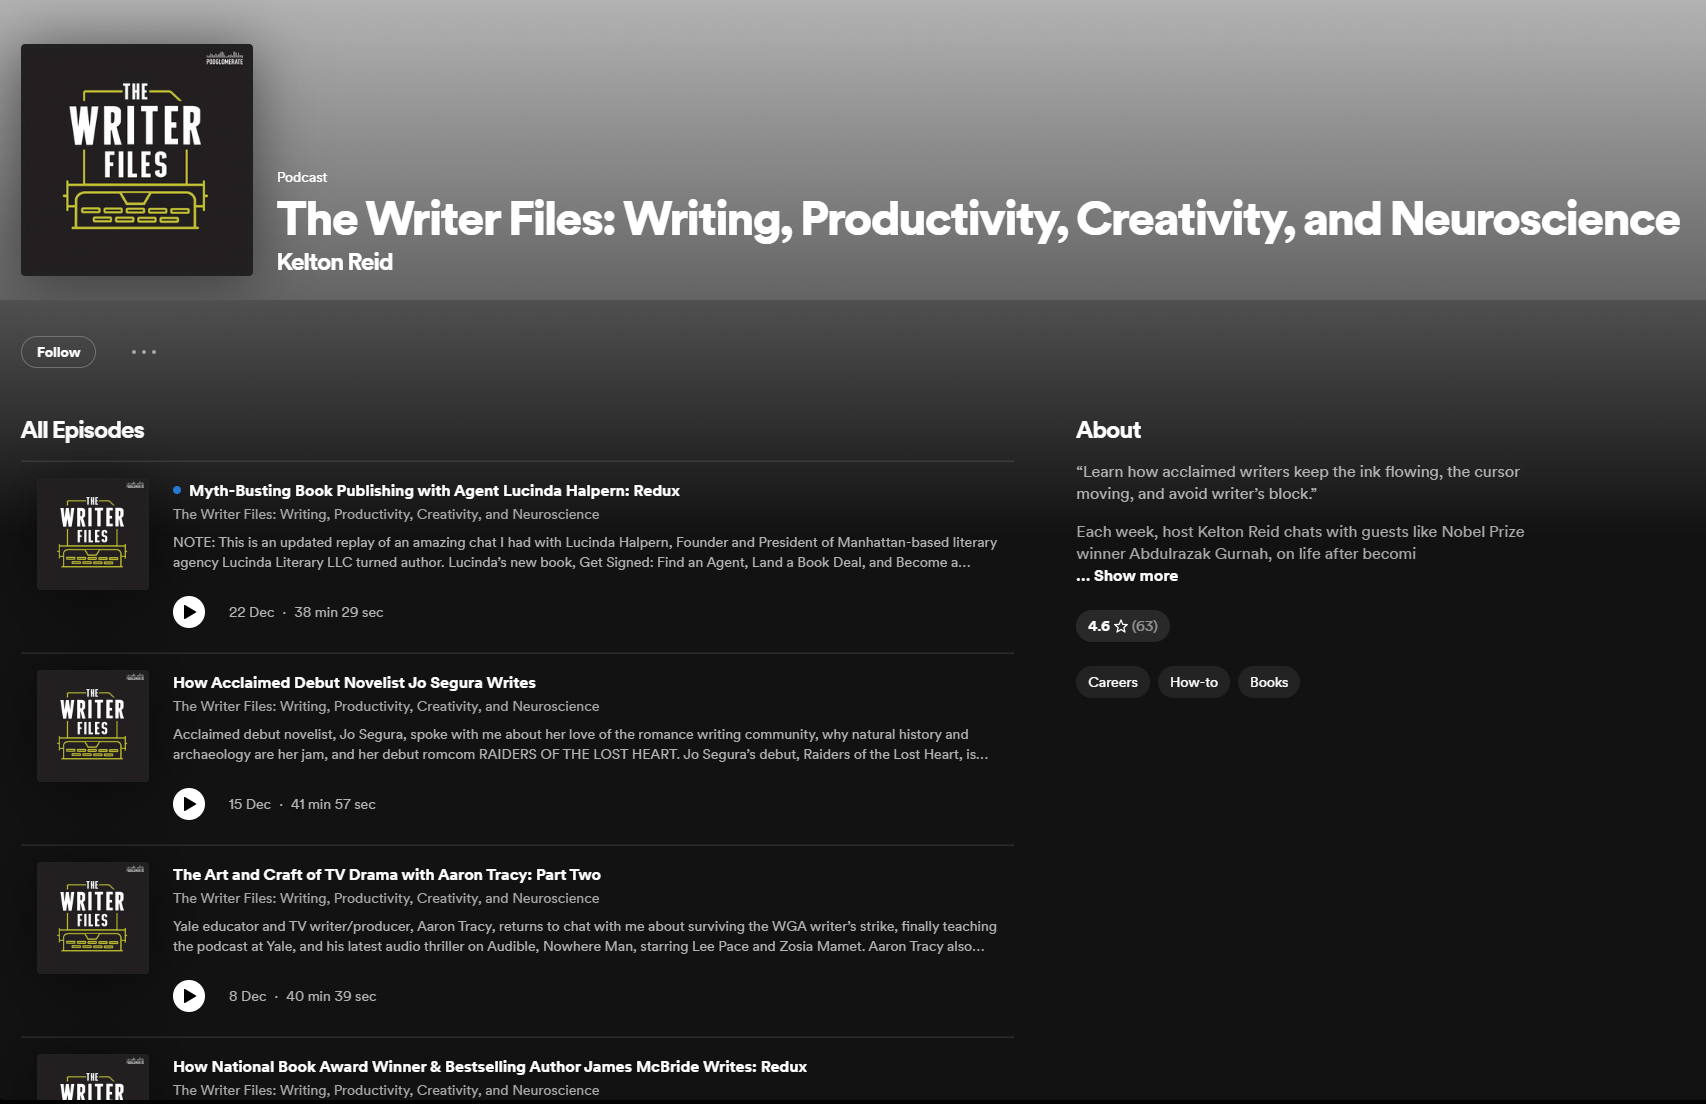 The Writer Files podcast